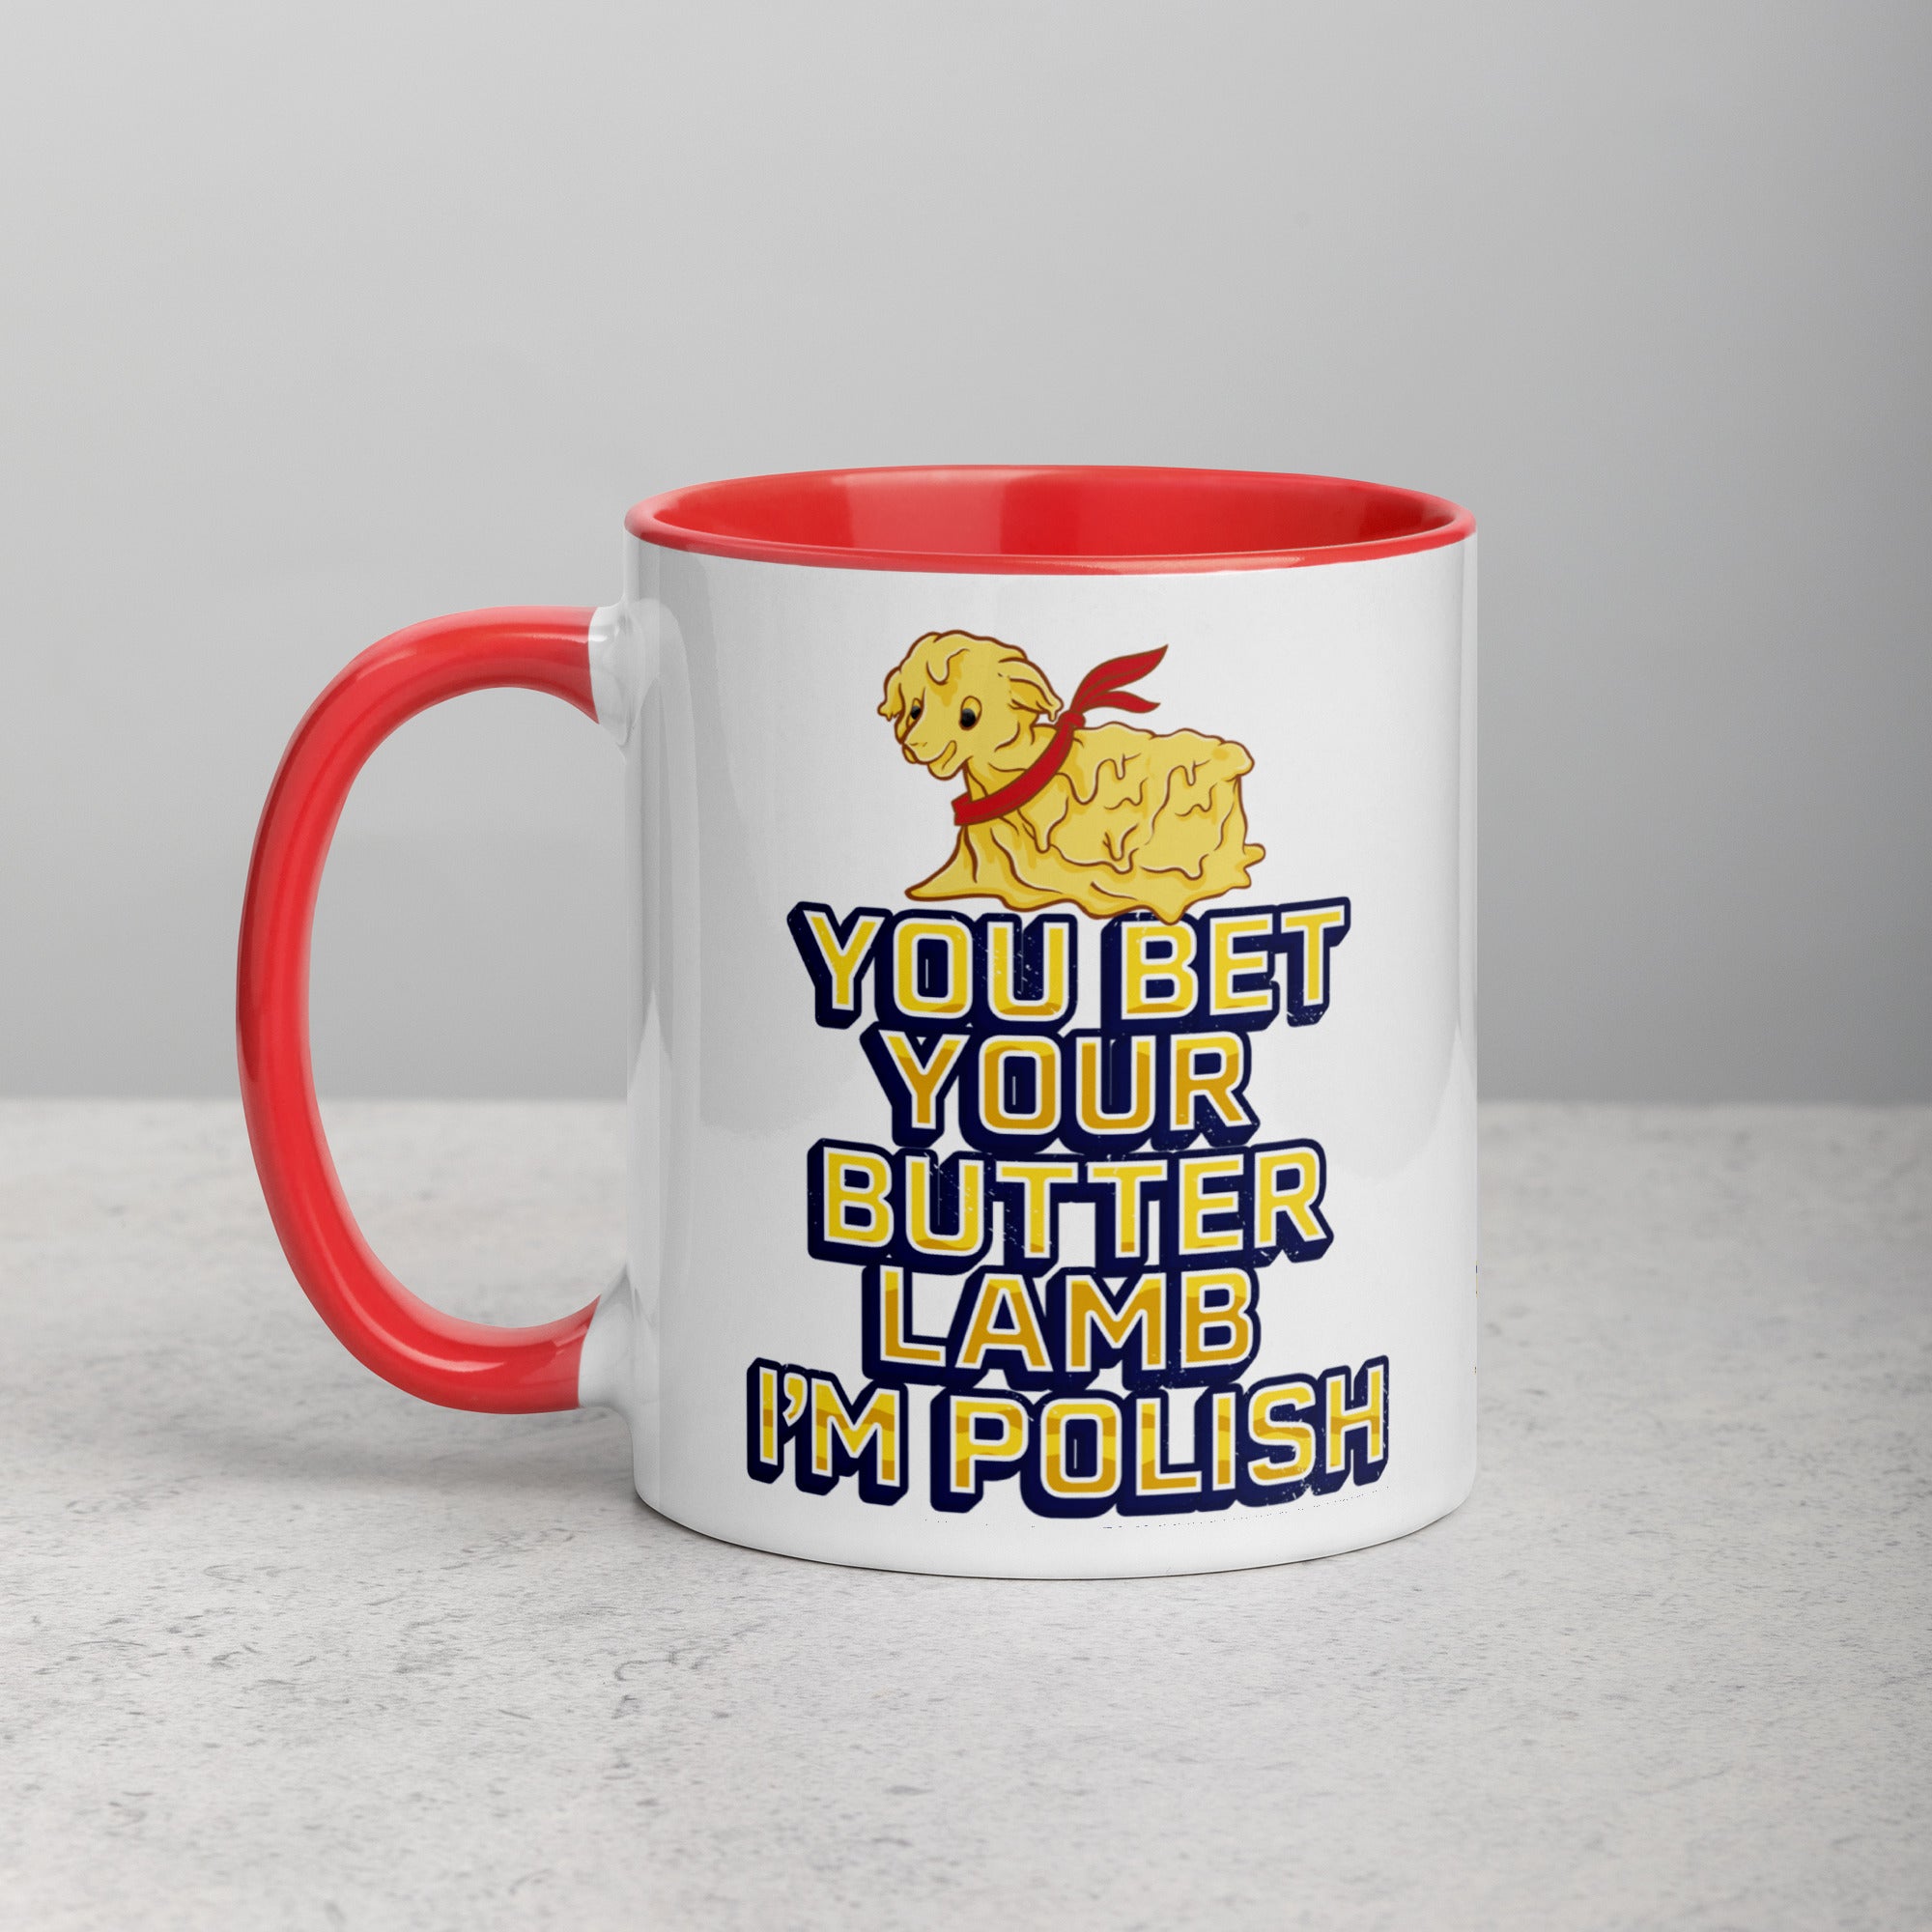 Bet Your Butter Lamb I'm Polish Coffee Mug with Color Inside  Polish Shirt Store Red 11 oz 